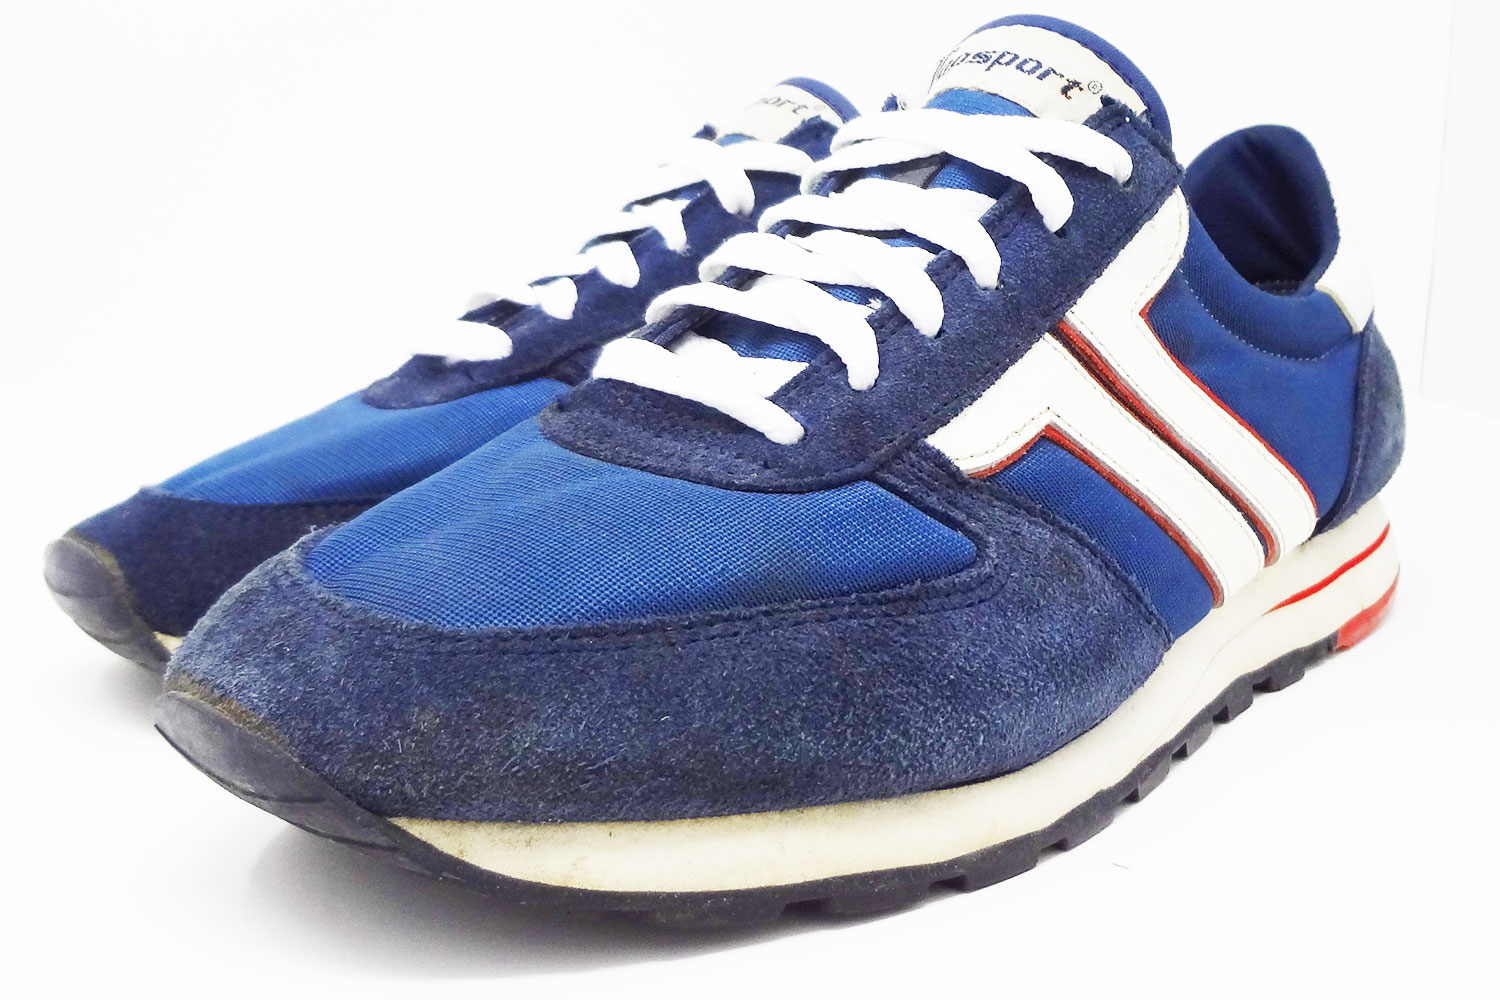 Vintage 80s Topsport running shoes @ The Deffest